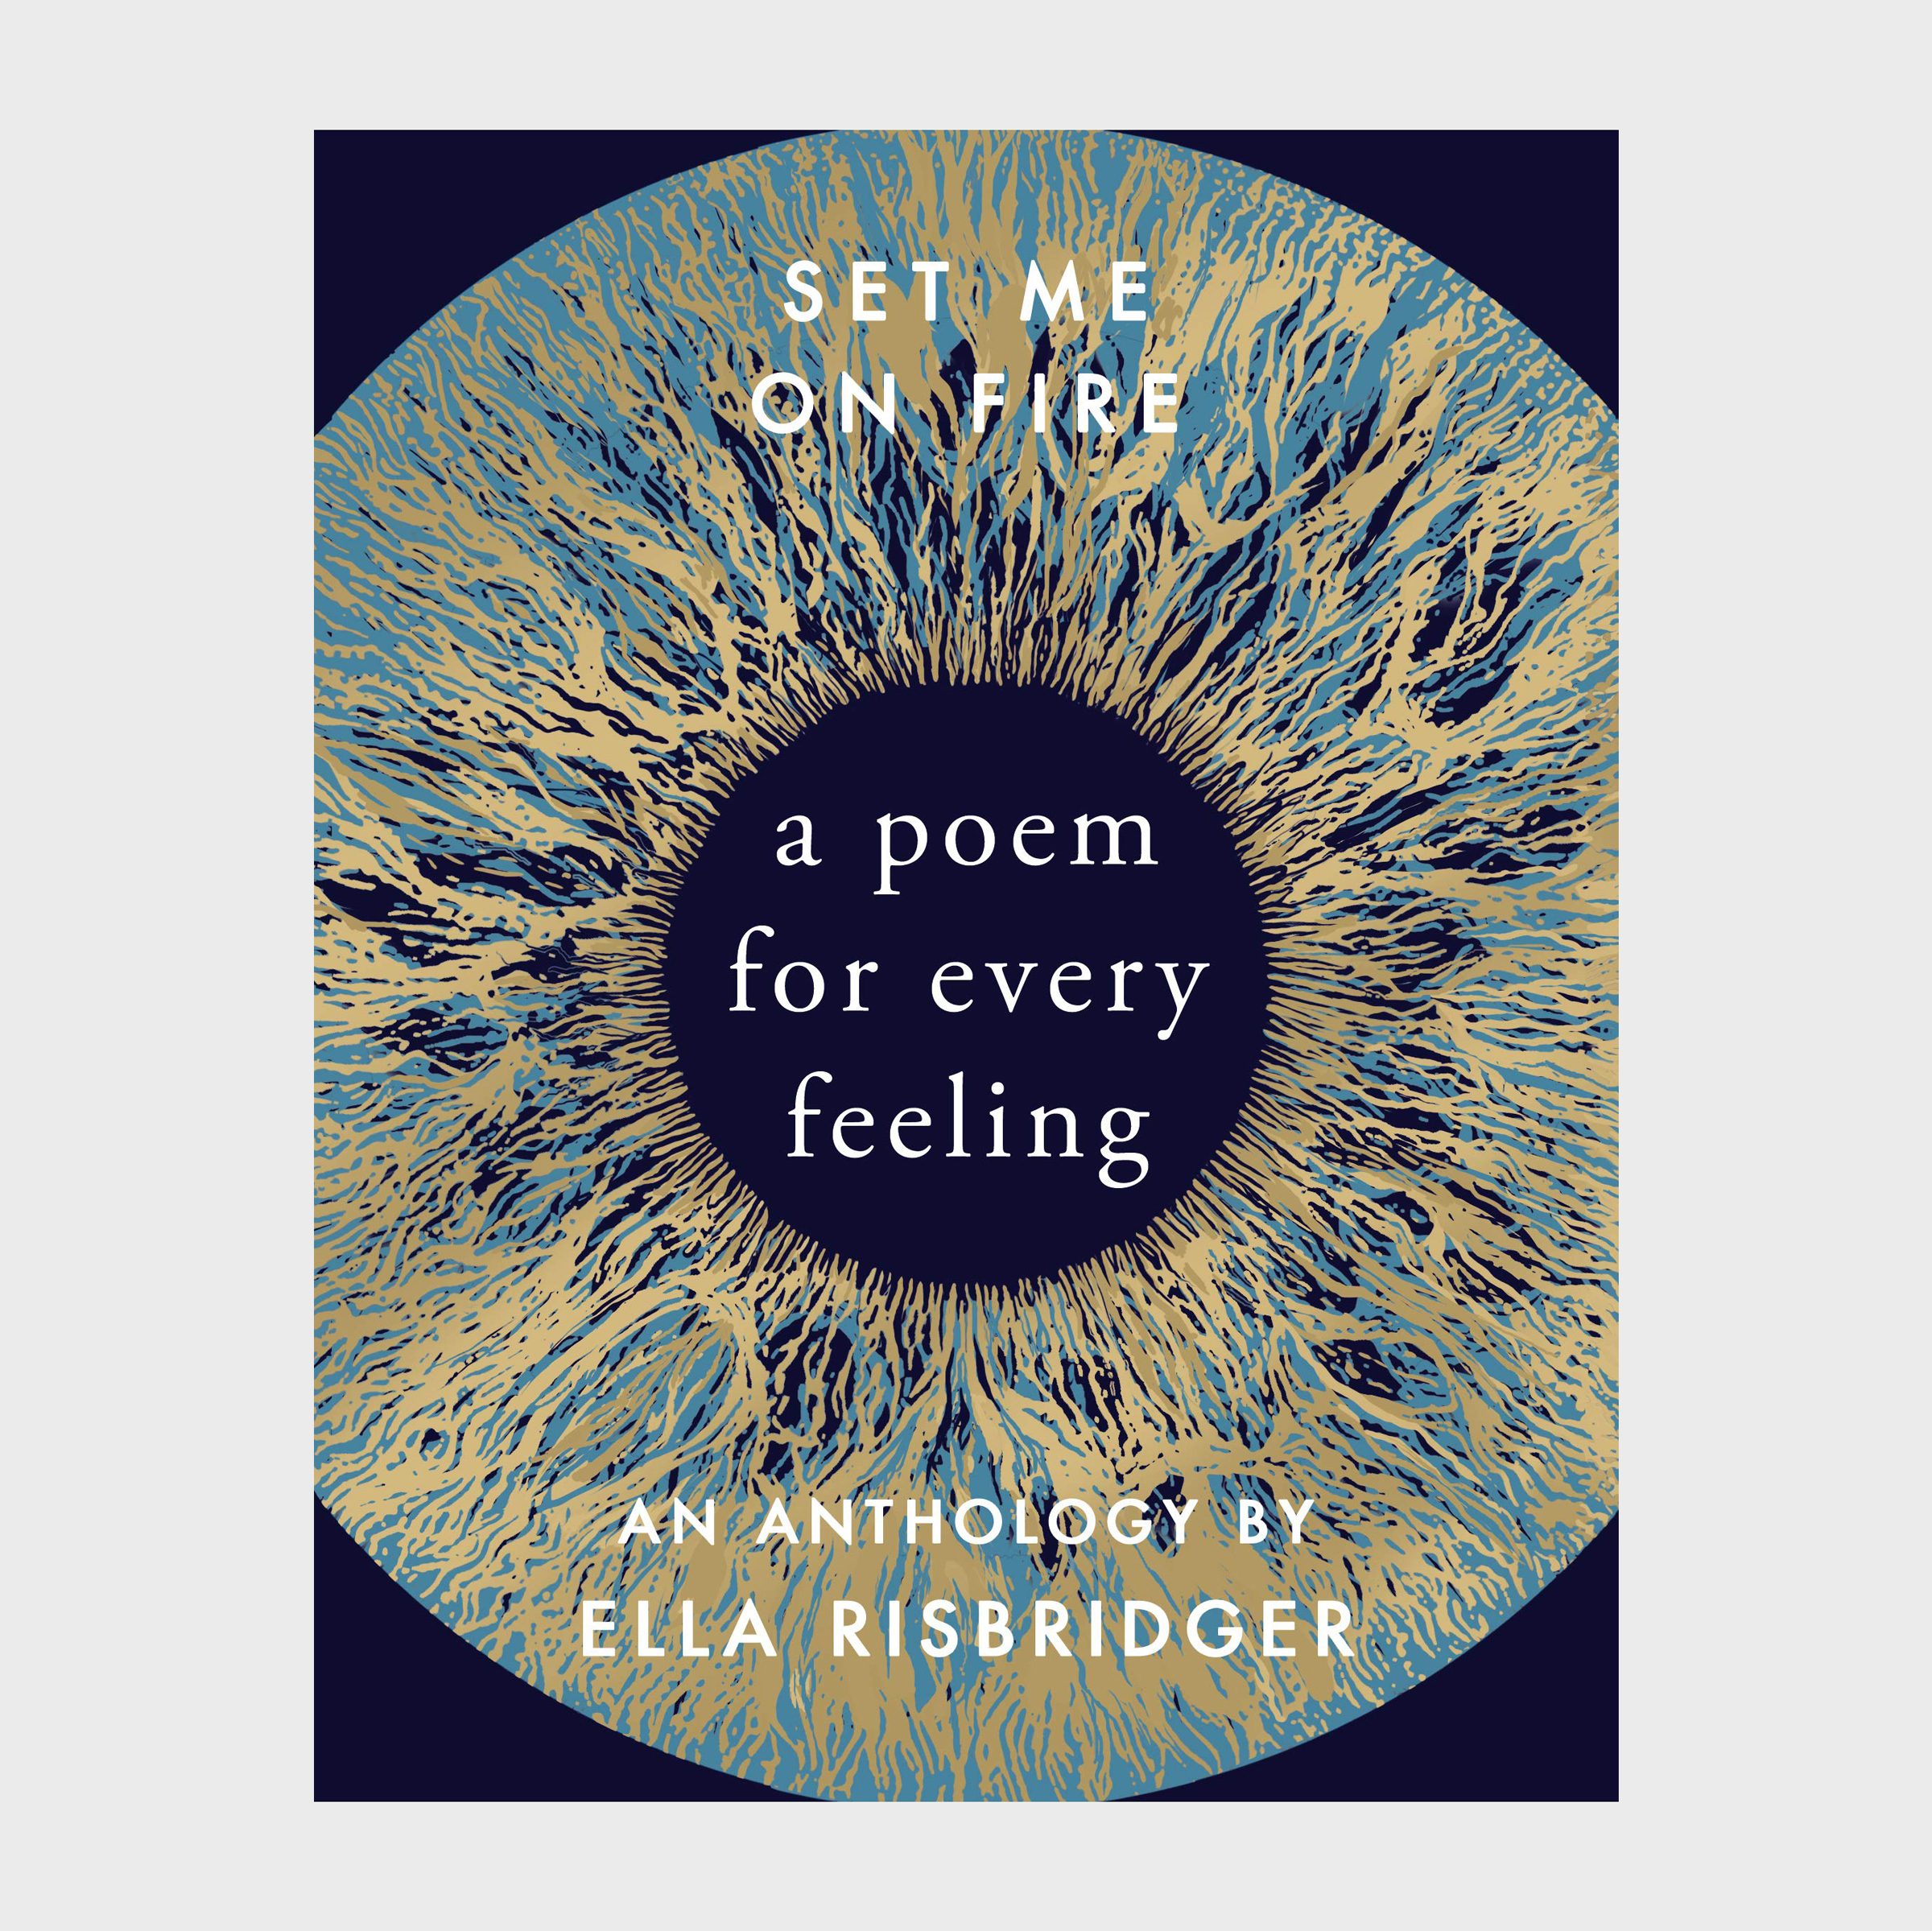 Set Me on Fire: A Poem for Every Feeling, edited by Ella Risbridger